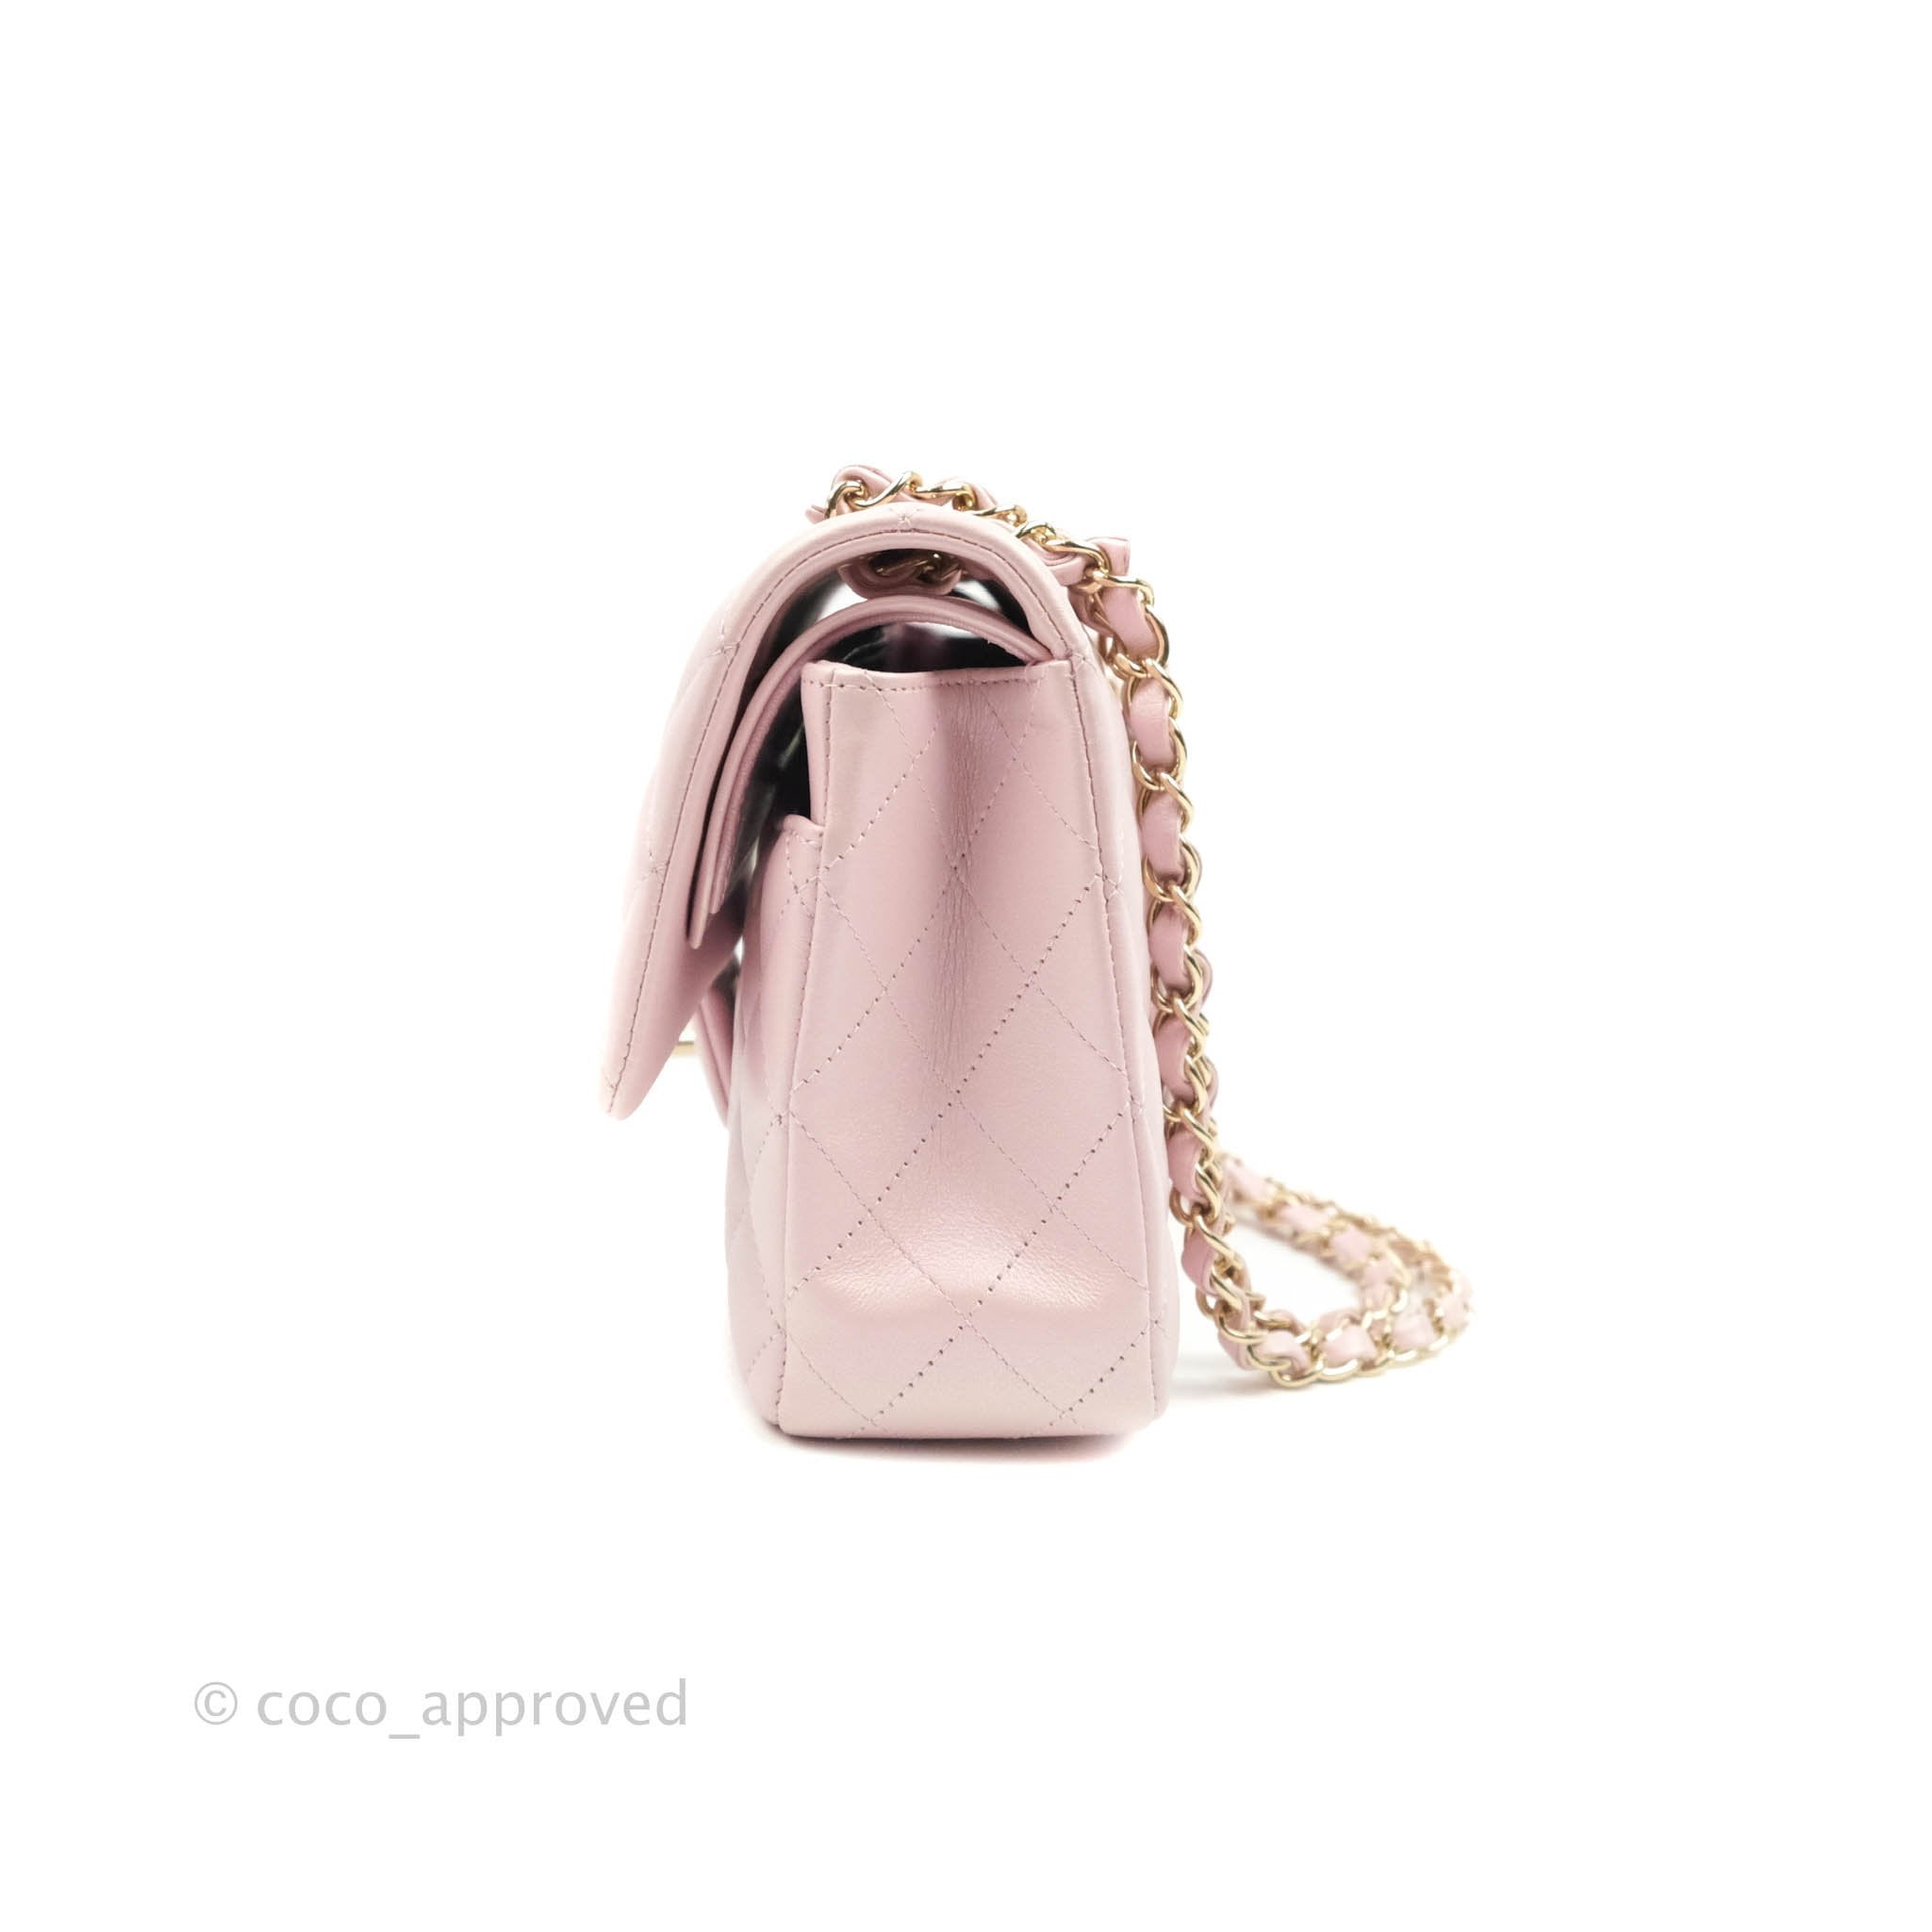 Chanel Pink Iridescent Quilted Lambskin Medium Classic Double Flap Bag, myGemma